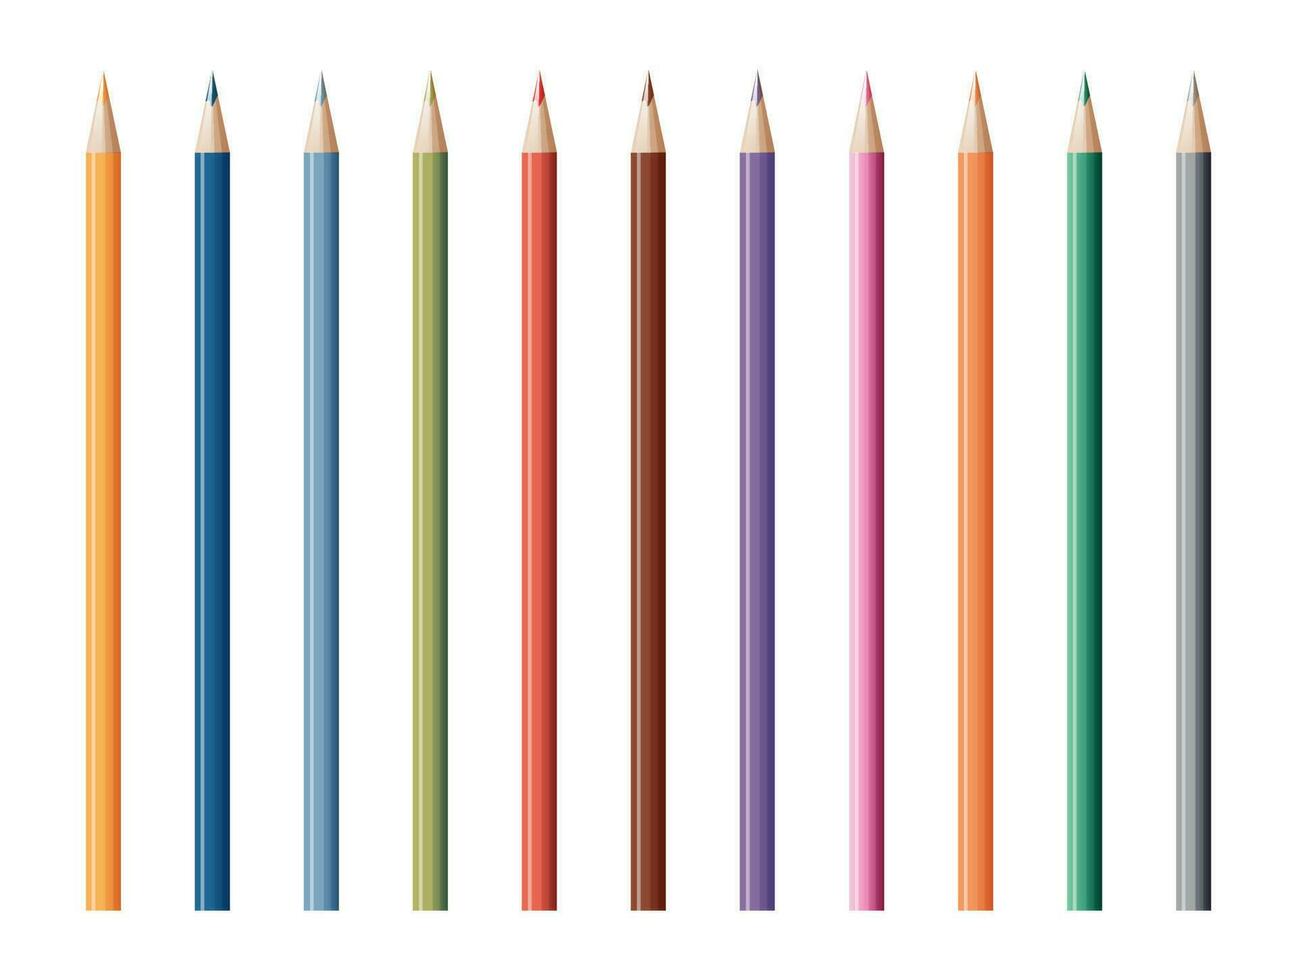 Set of vector colored pencils isolated on white background. School supplies, stationery, creativity, hobby, art tool